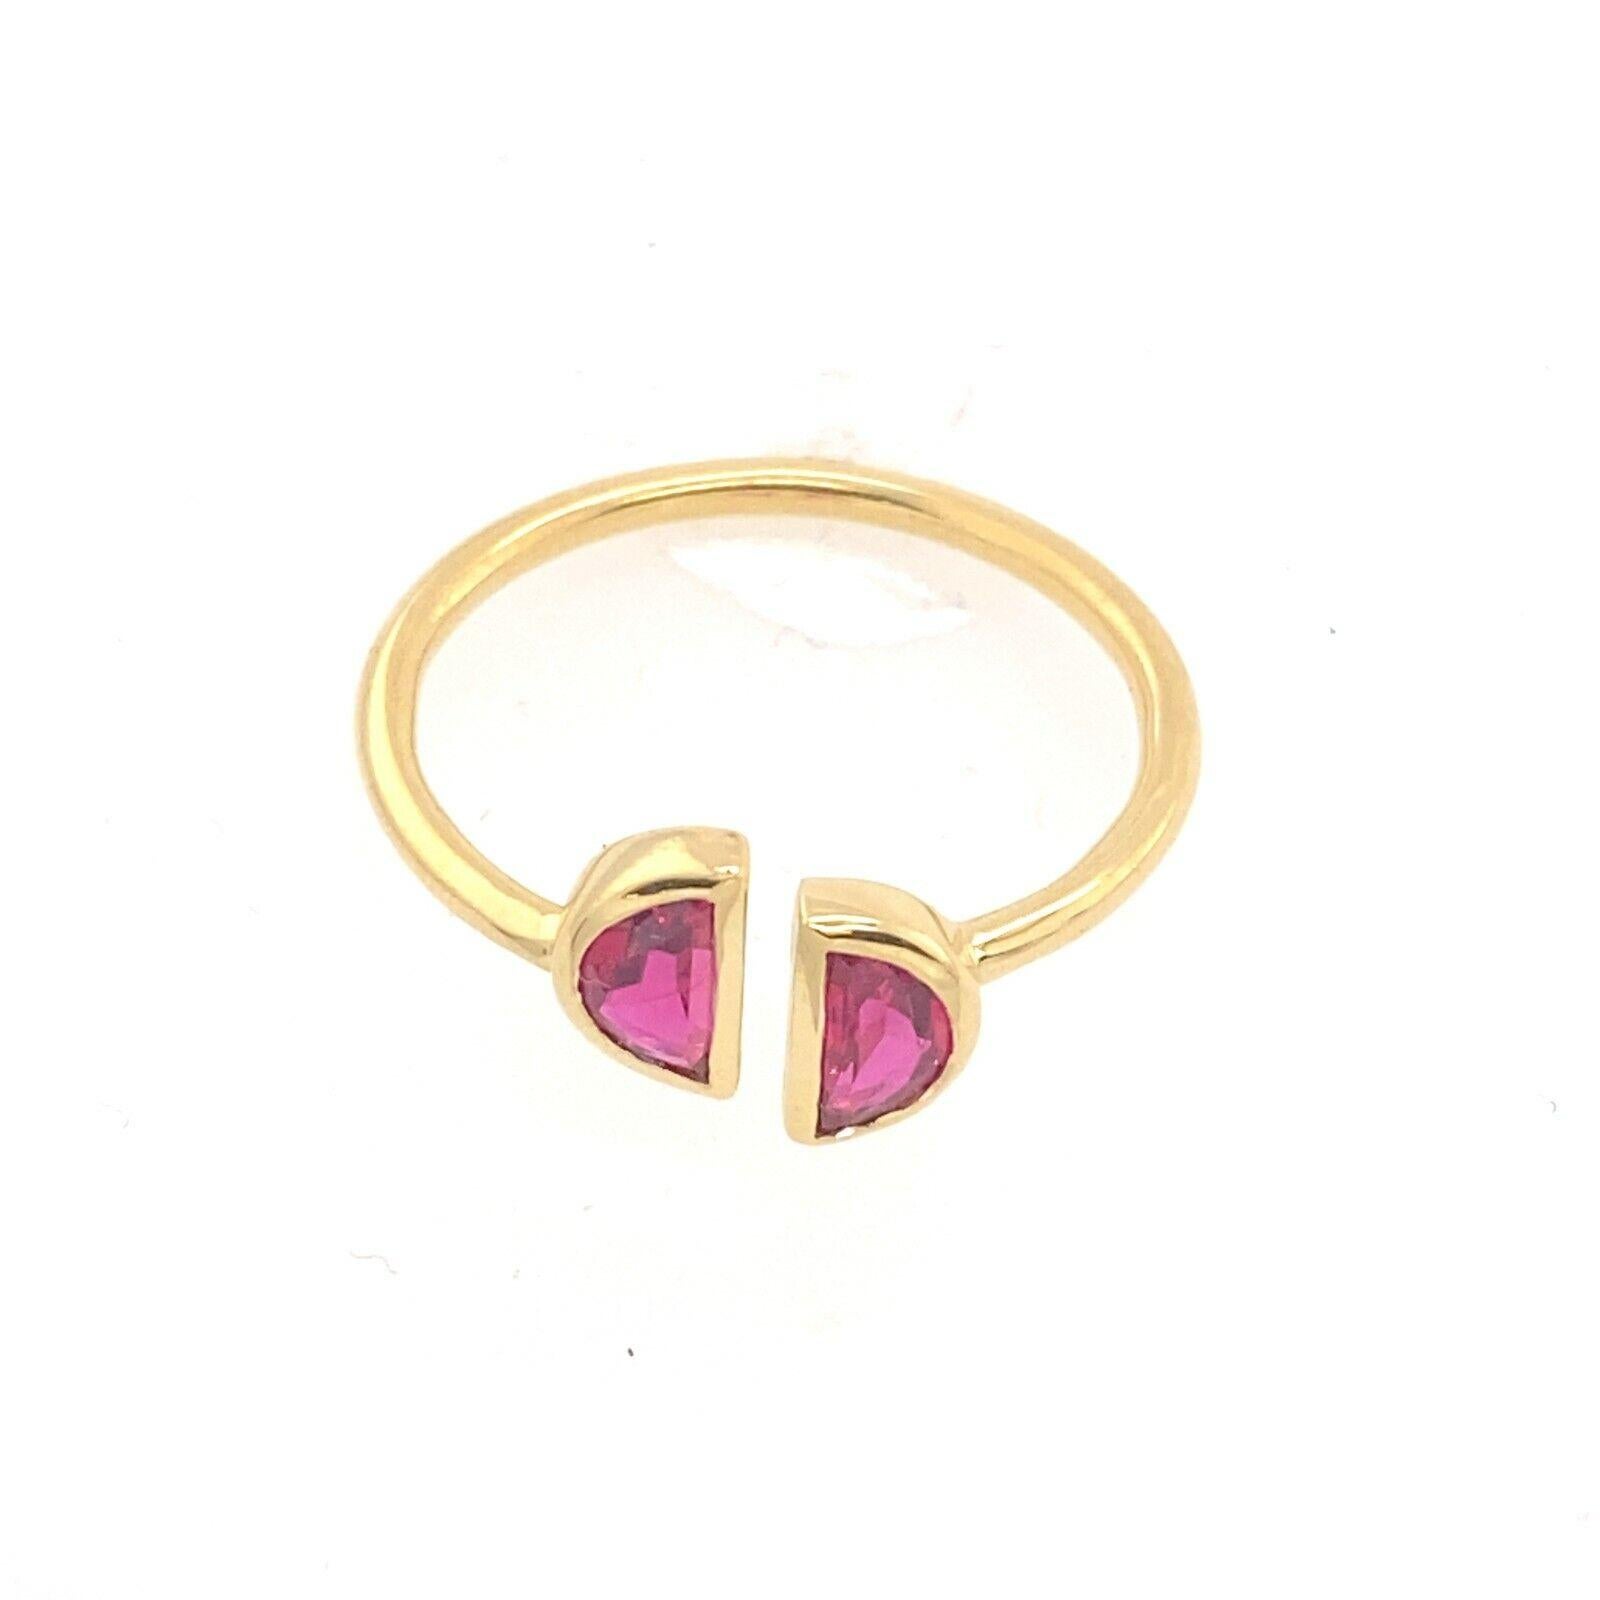 2 Matching Moon Shape Pigeon Rubies , 0.66ct Set In 18ct Yellow Gold Ring
This elegant Ruby ring features two matching pigeon cut Rubies of 0.66ct set in an 18ct Yellow Gold band. The two stones are offering a unique and contemporary